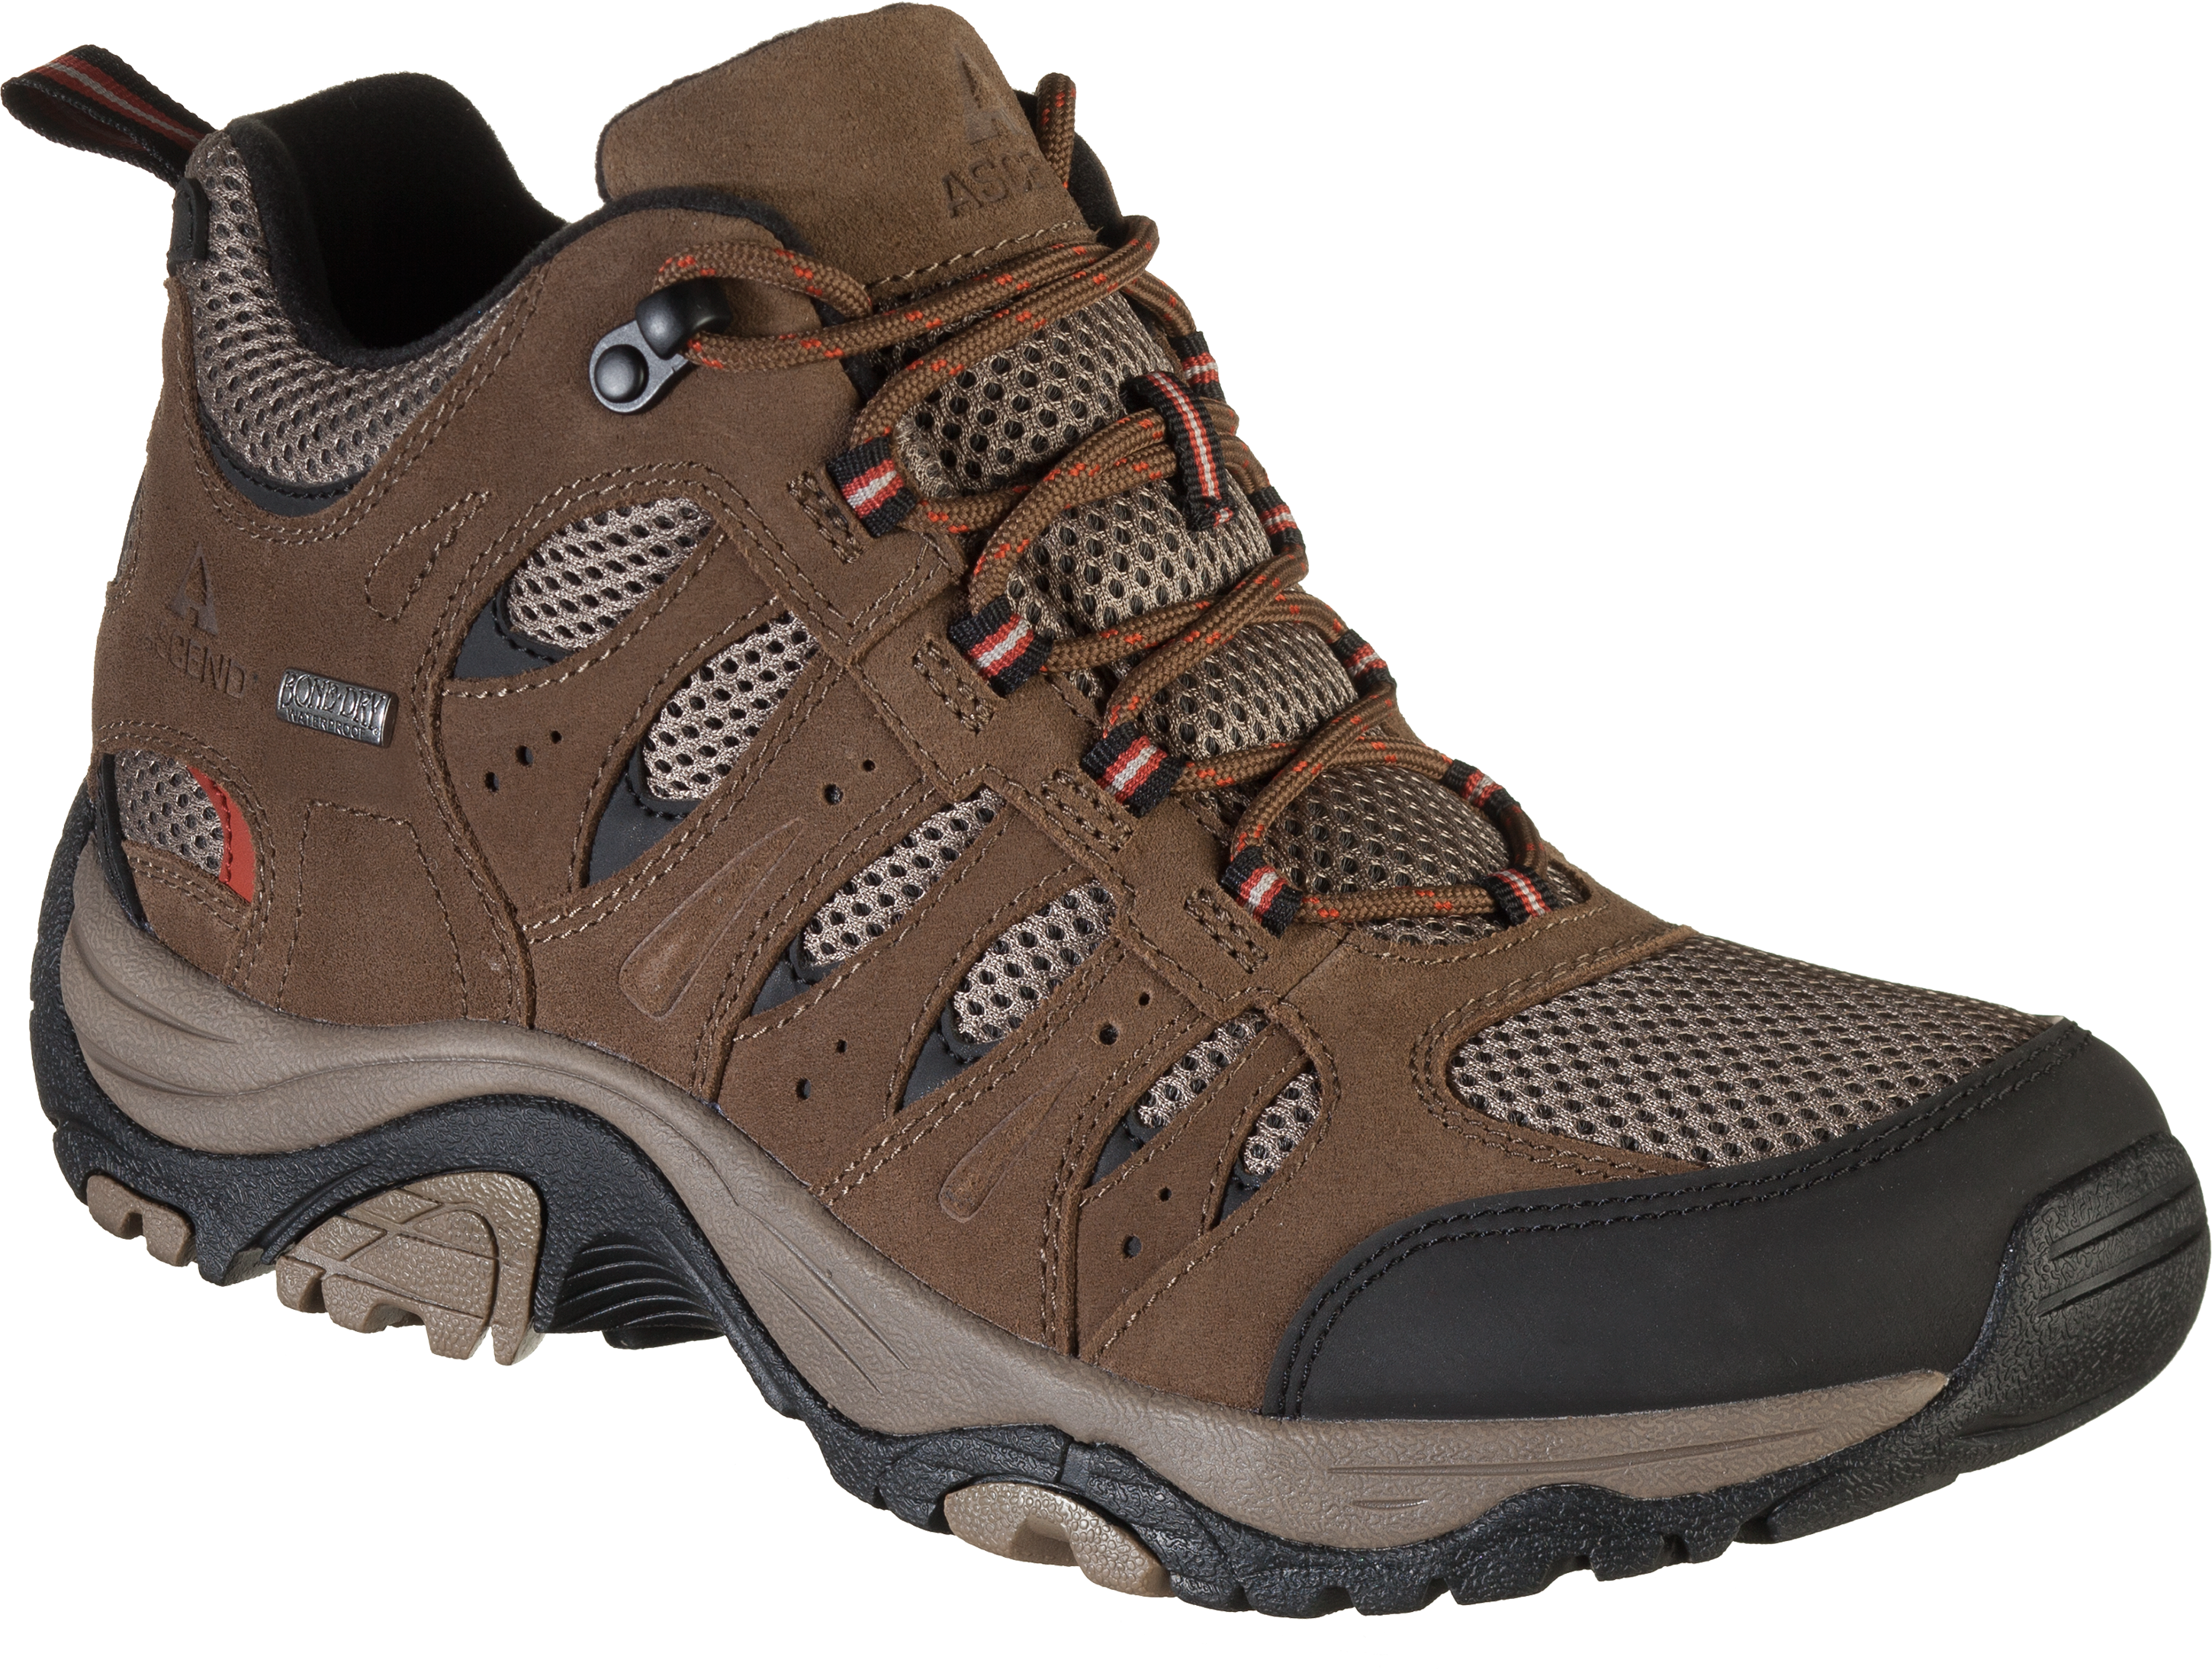 Ascend Lisco Mid Waterproof Hiking Boots for Men - Chocolate - 9M